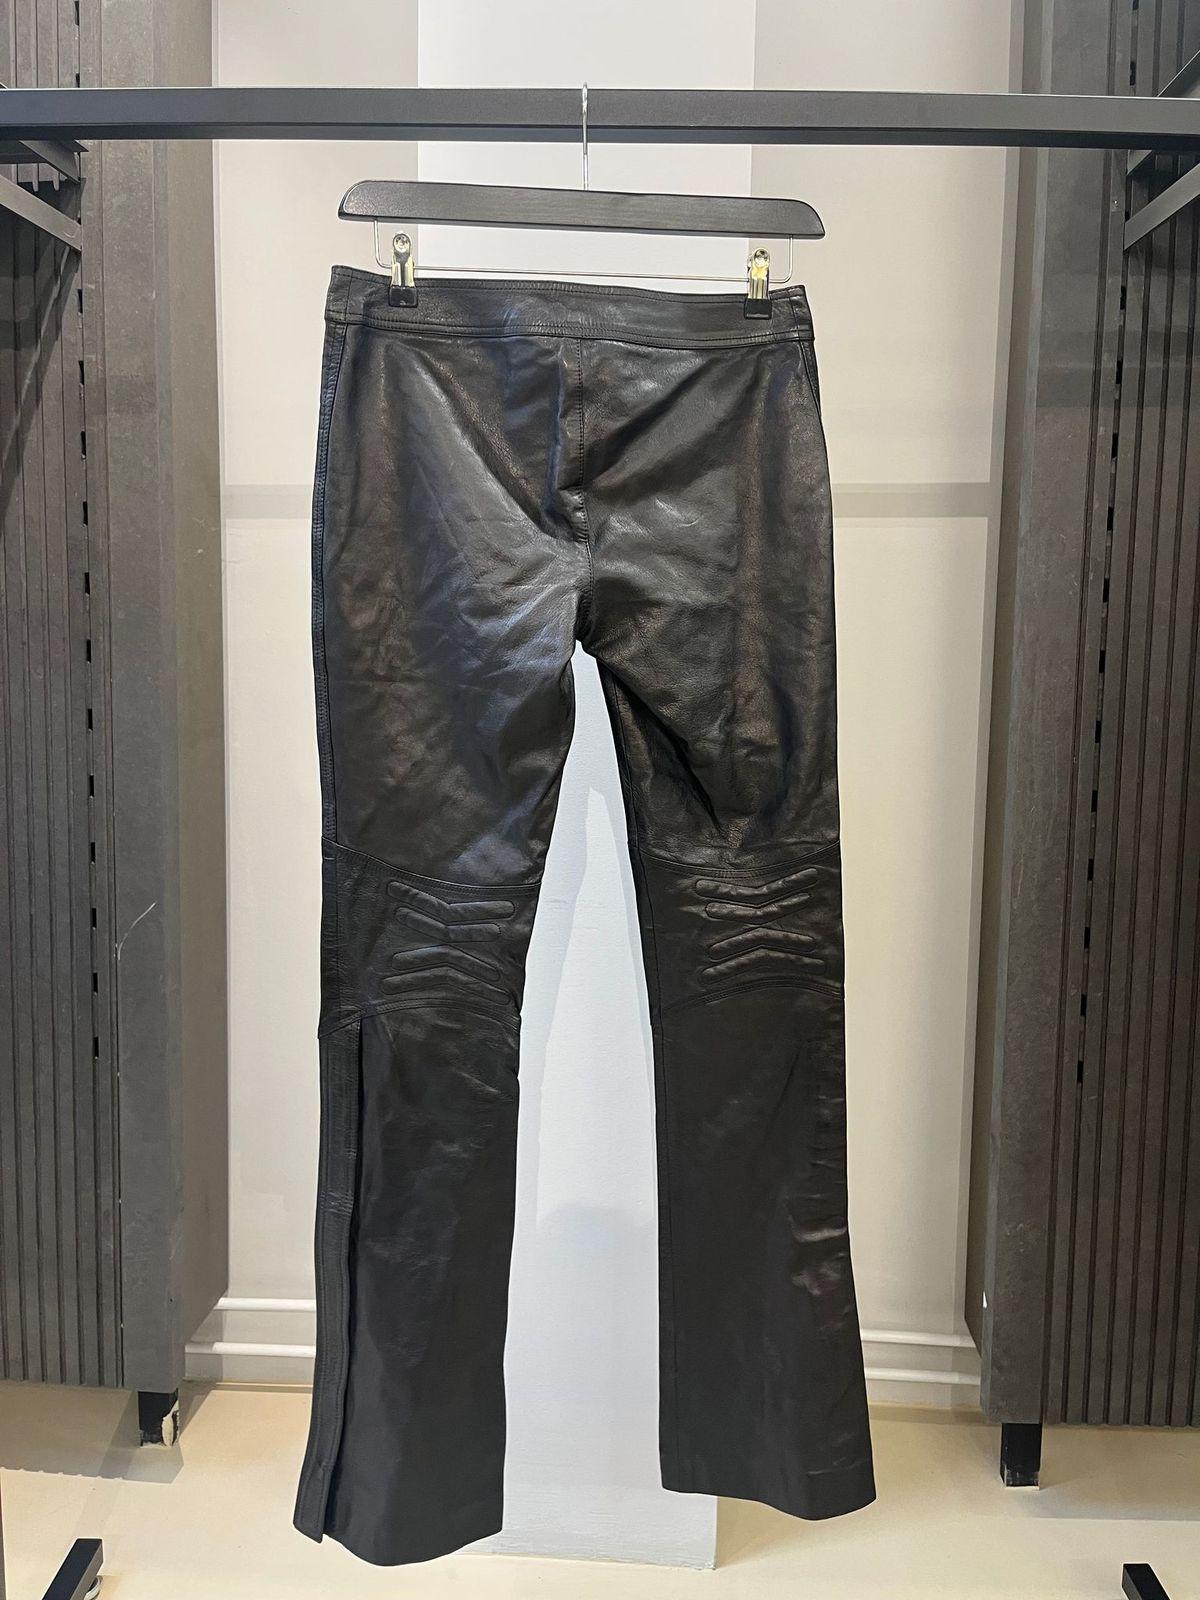 Gucci
Moto Belted Leather Pants
Size 30 inch

Beautiful leather pants by Gucci featuring moto applications on the knees and zippers. Very rare piece. In great condition without any flaws, made in Italy.
